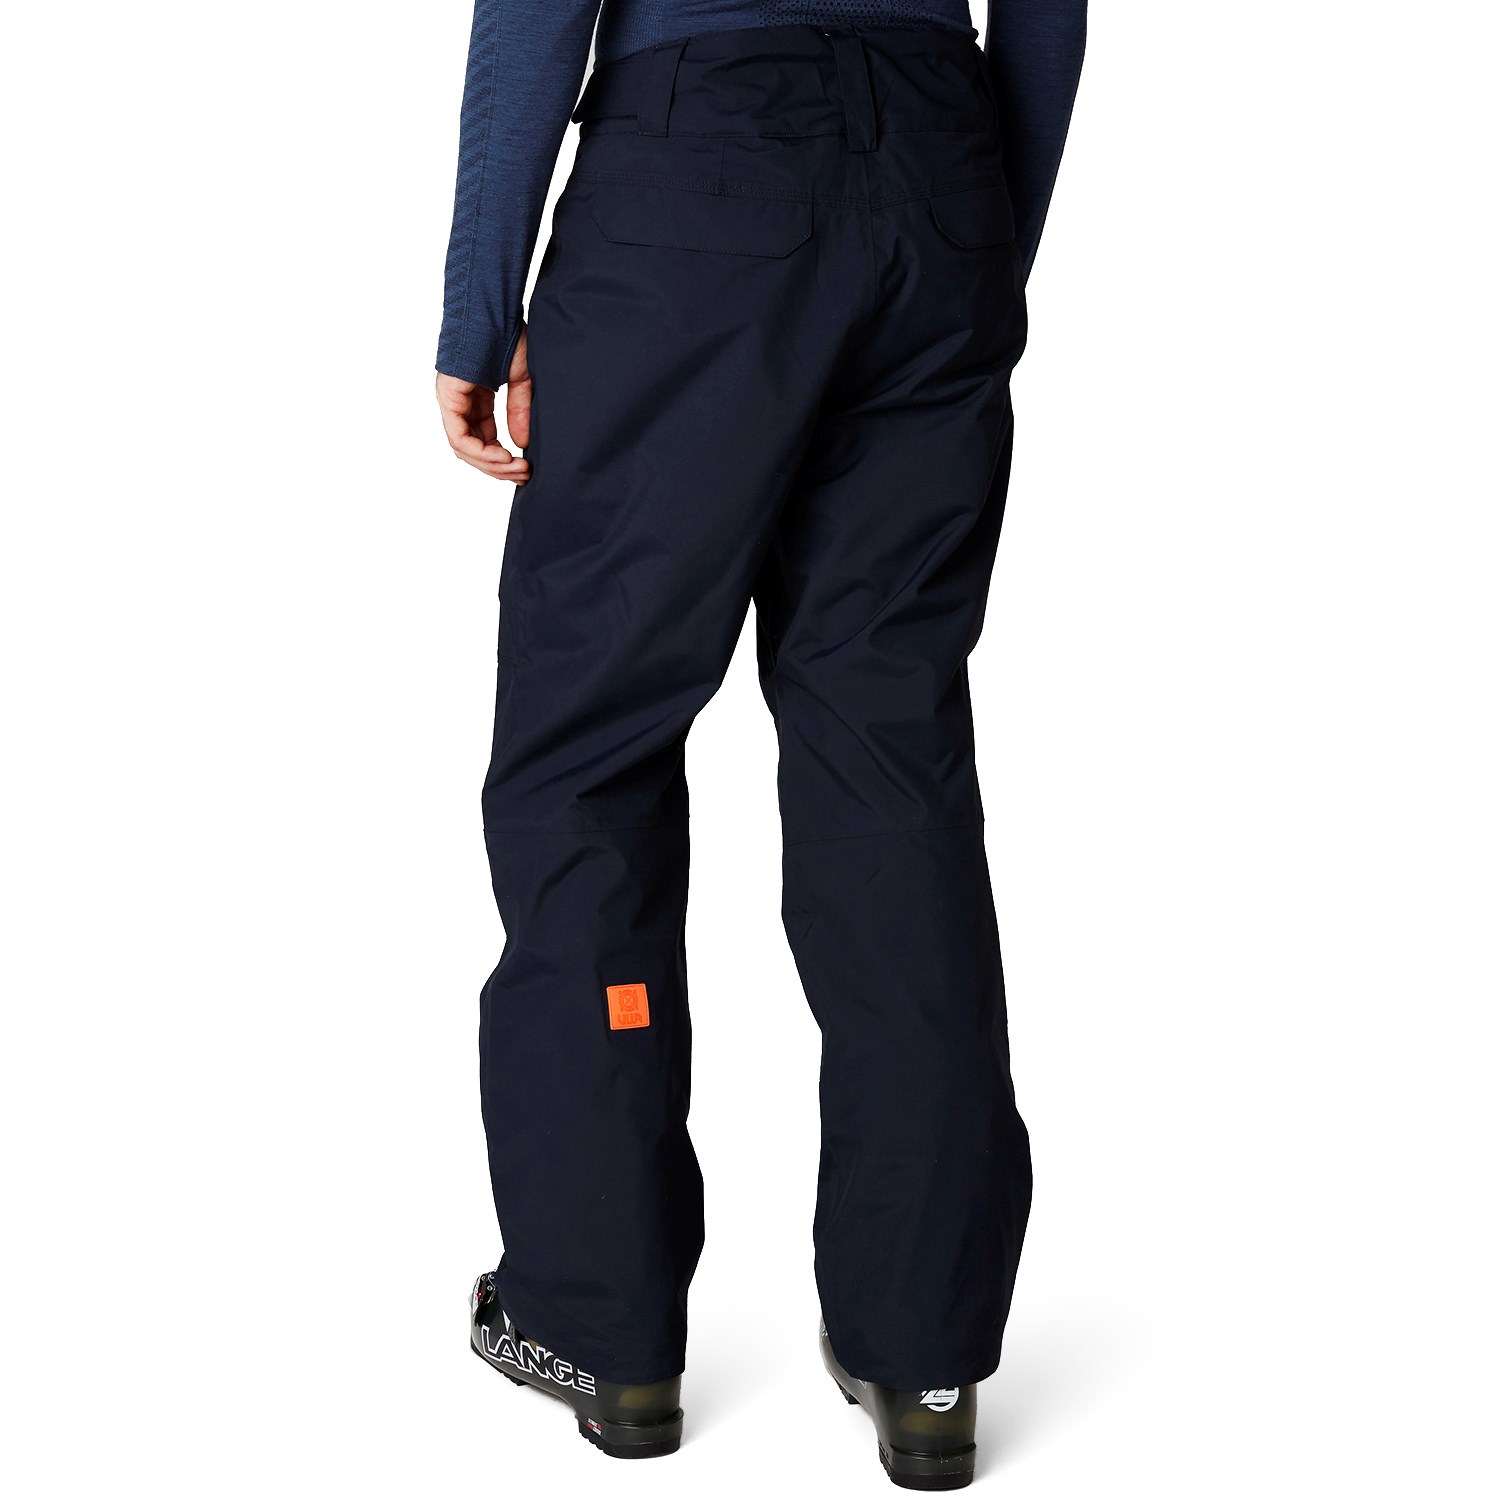 sogn cargo pant